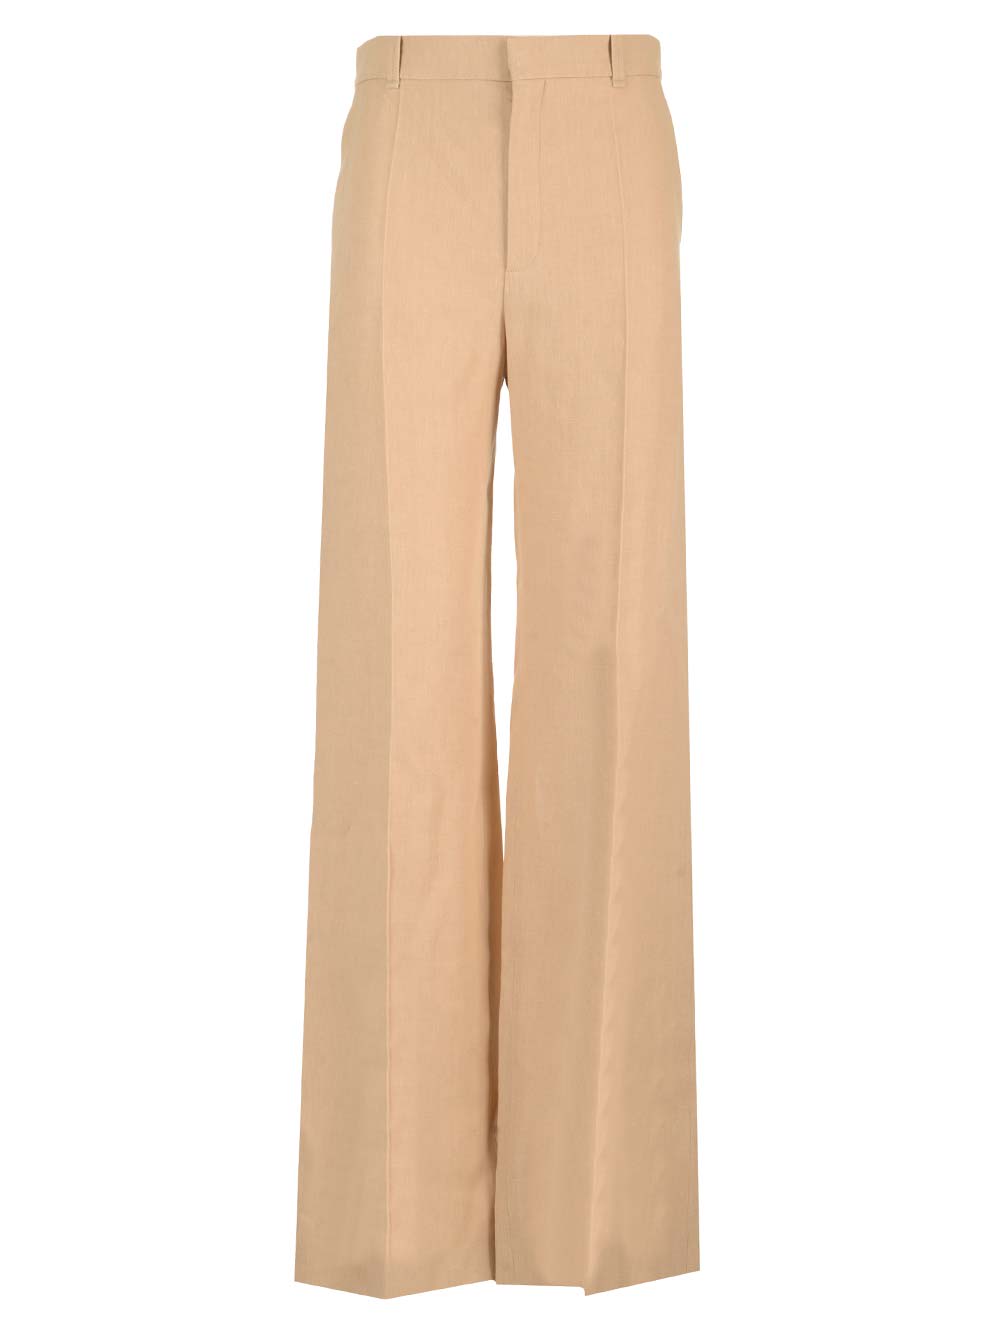 Chloé Flared Trousers In Brown